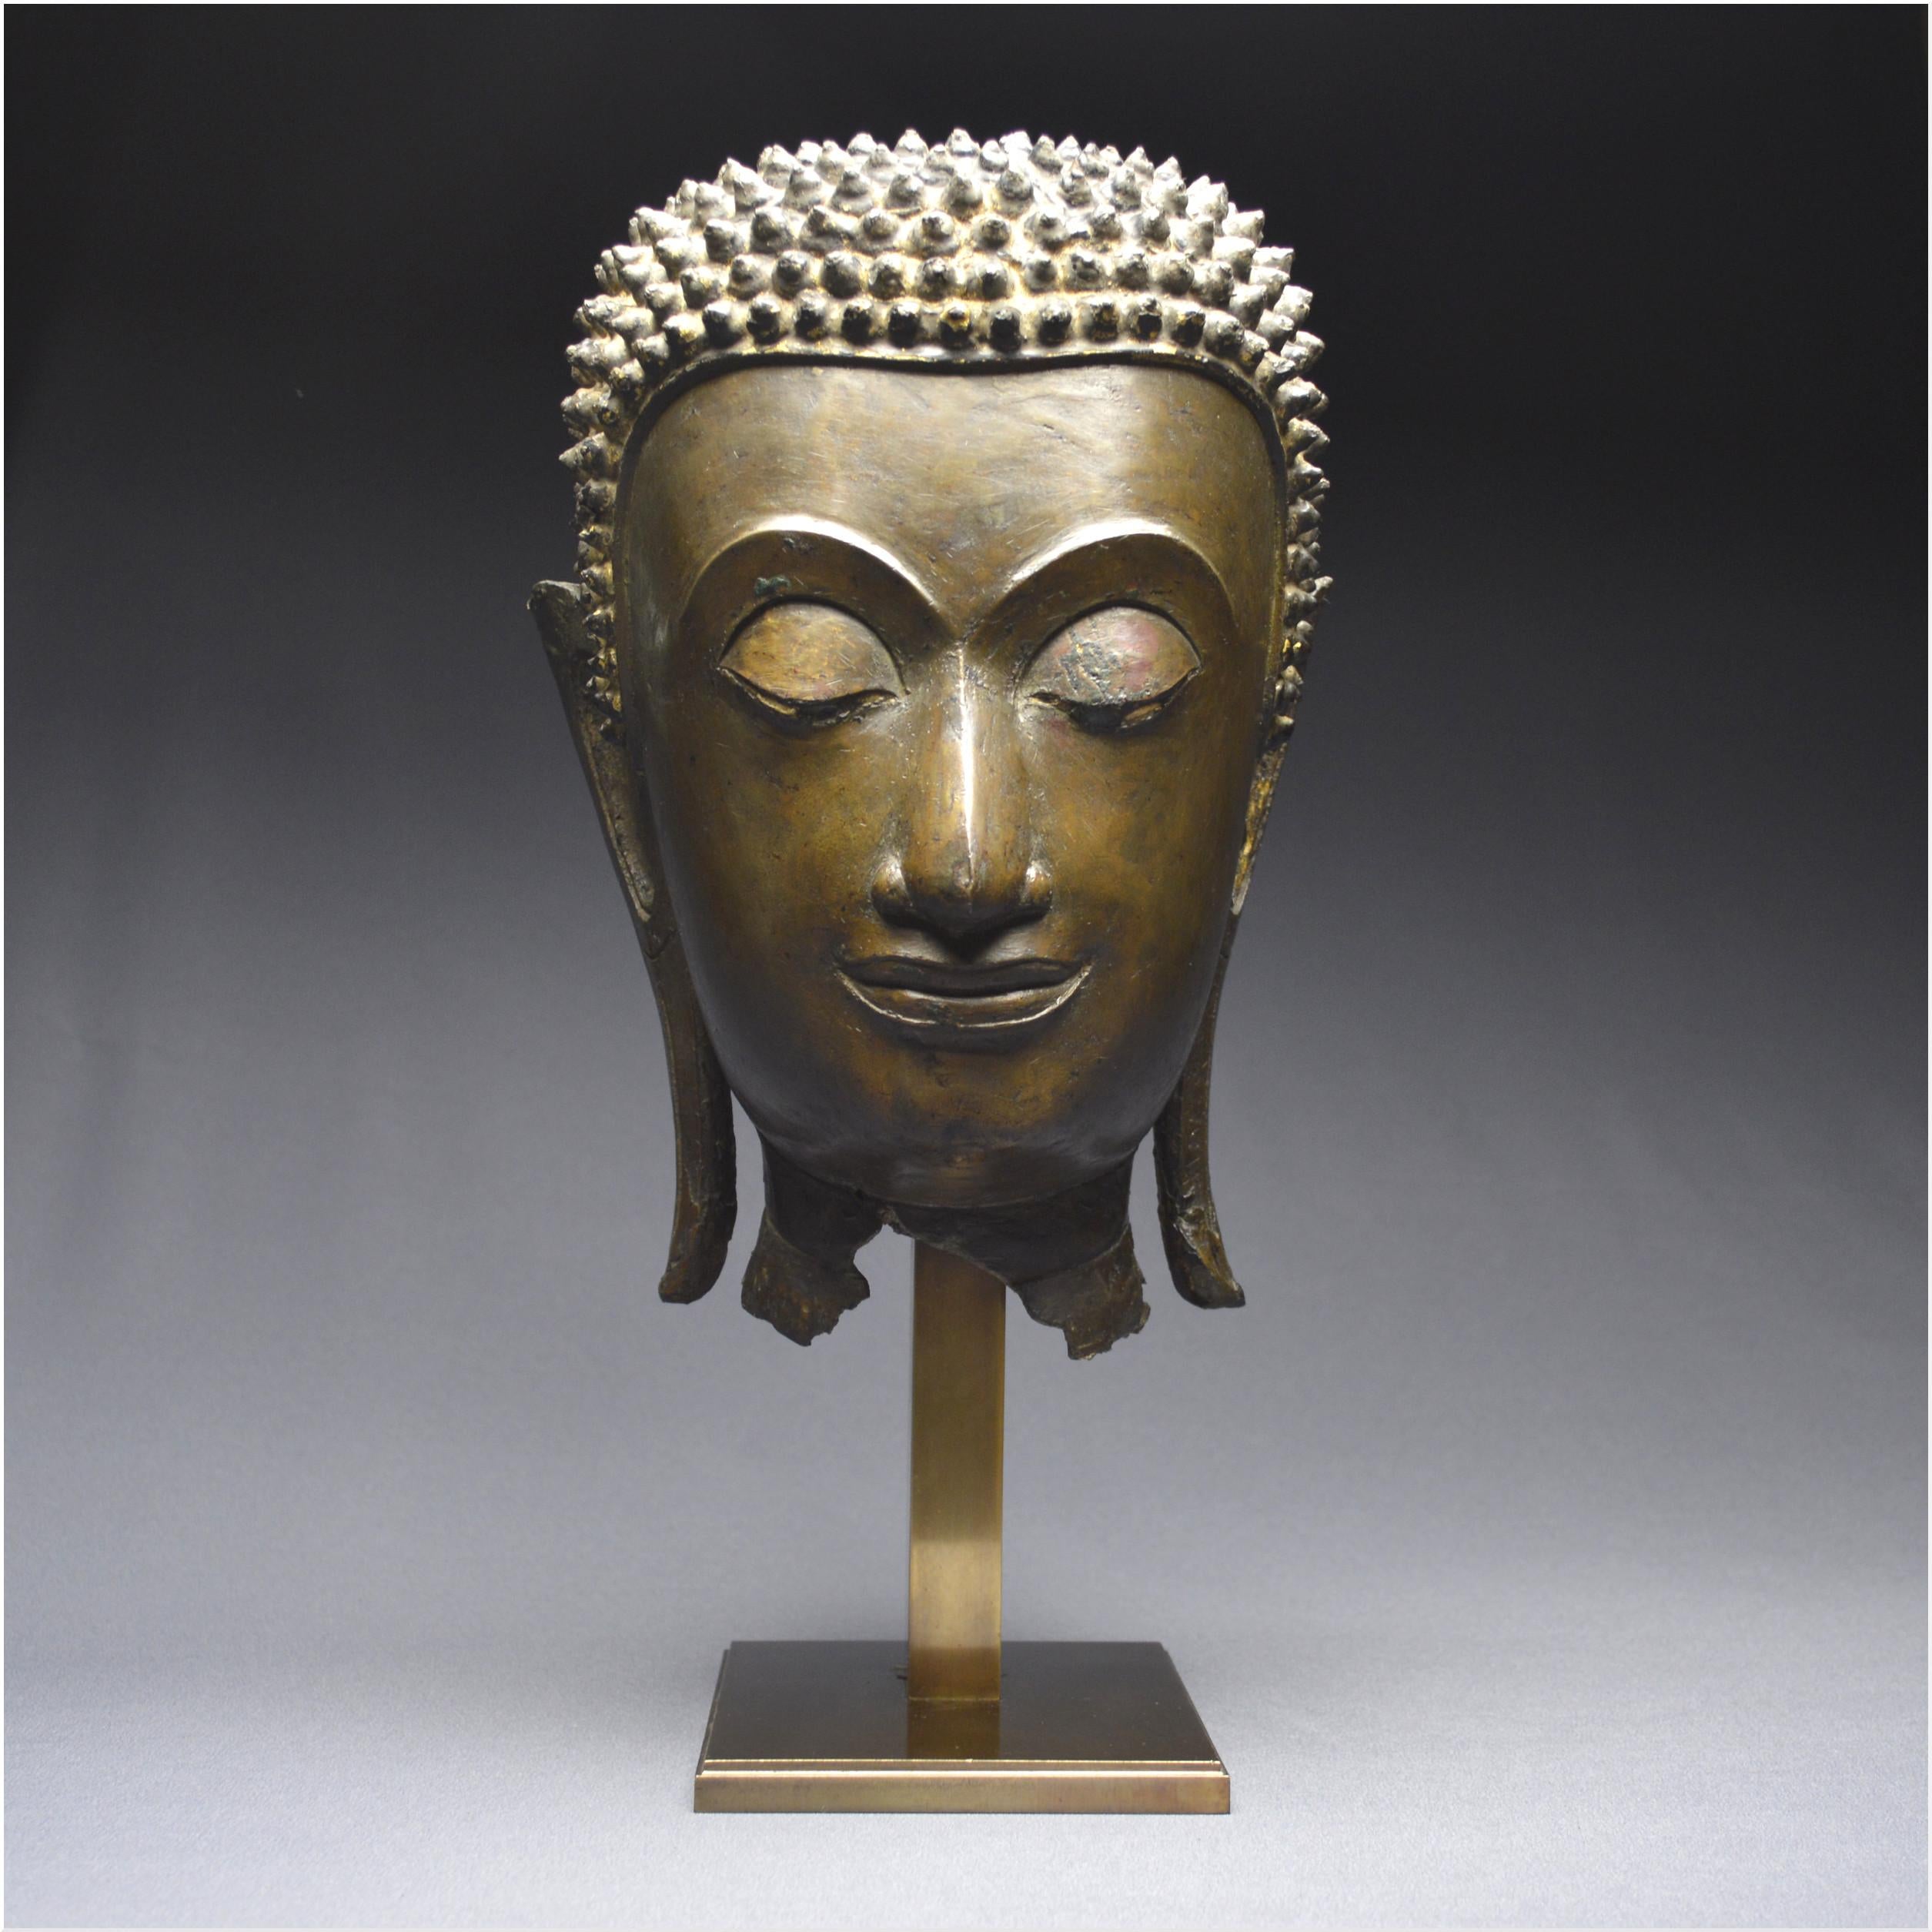 Large bronze Buddha head
Ancient Kingdom of Siam
Ayutthaya School
16th - 17th century

The very soft face is set in an oval and is characterized by fine curvilinear brow ridges with perfect curvature meeting at the base of the an aquiline nose with